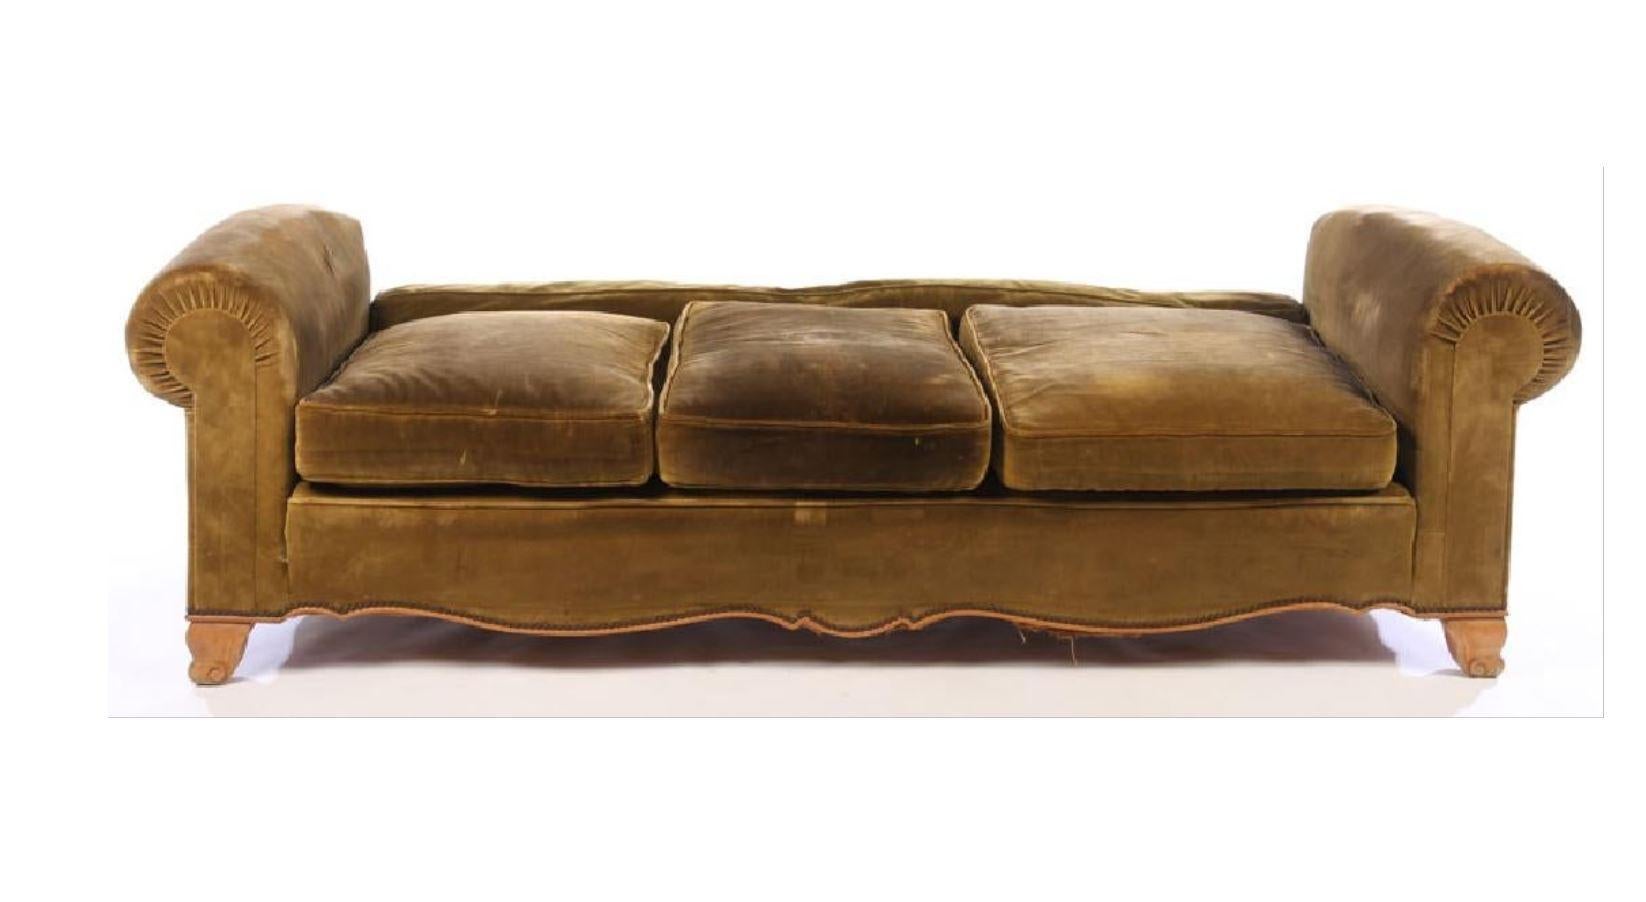 A gracefully designed daybed in the style of Andre Arbus, upholstered in French velvet, circa 1950. The daybed is designed with rolled arms, loose cushions and seat pillows and a curved apron and feet.